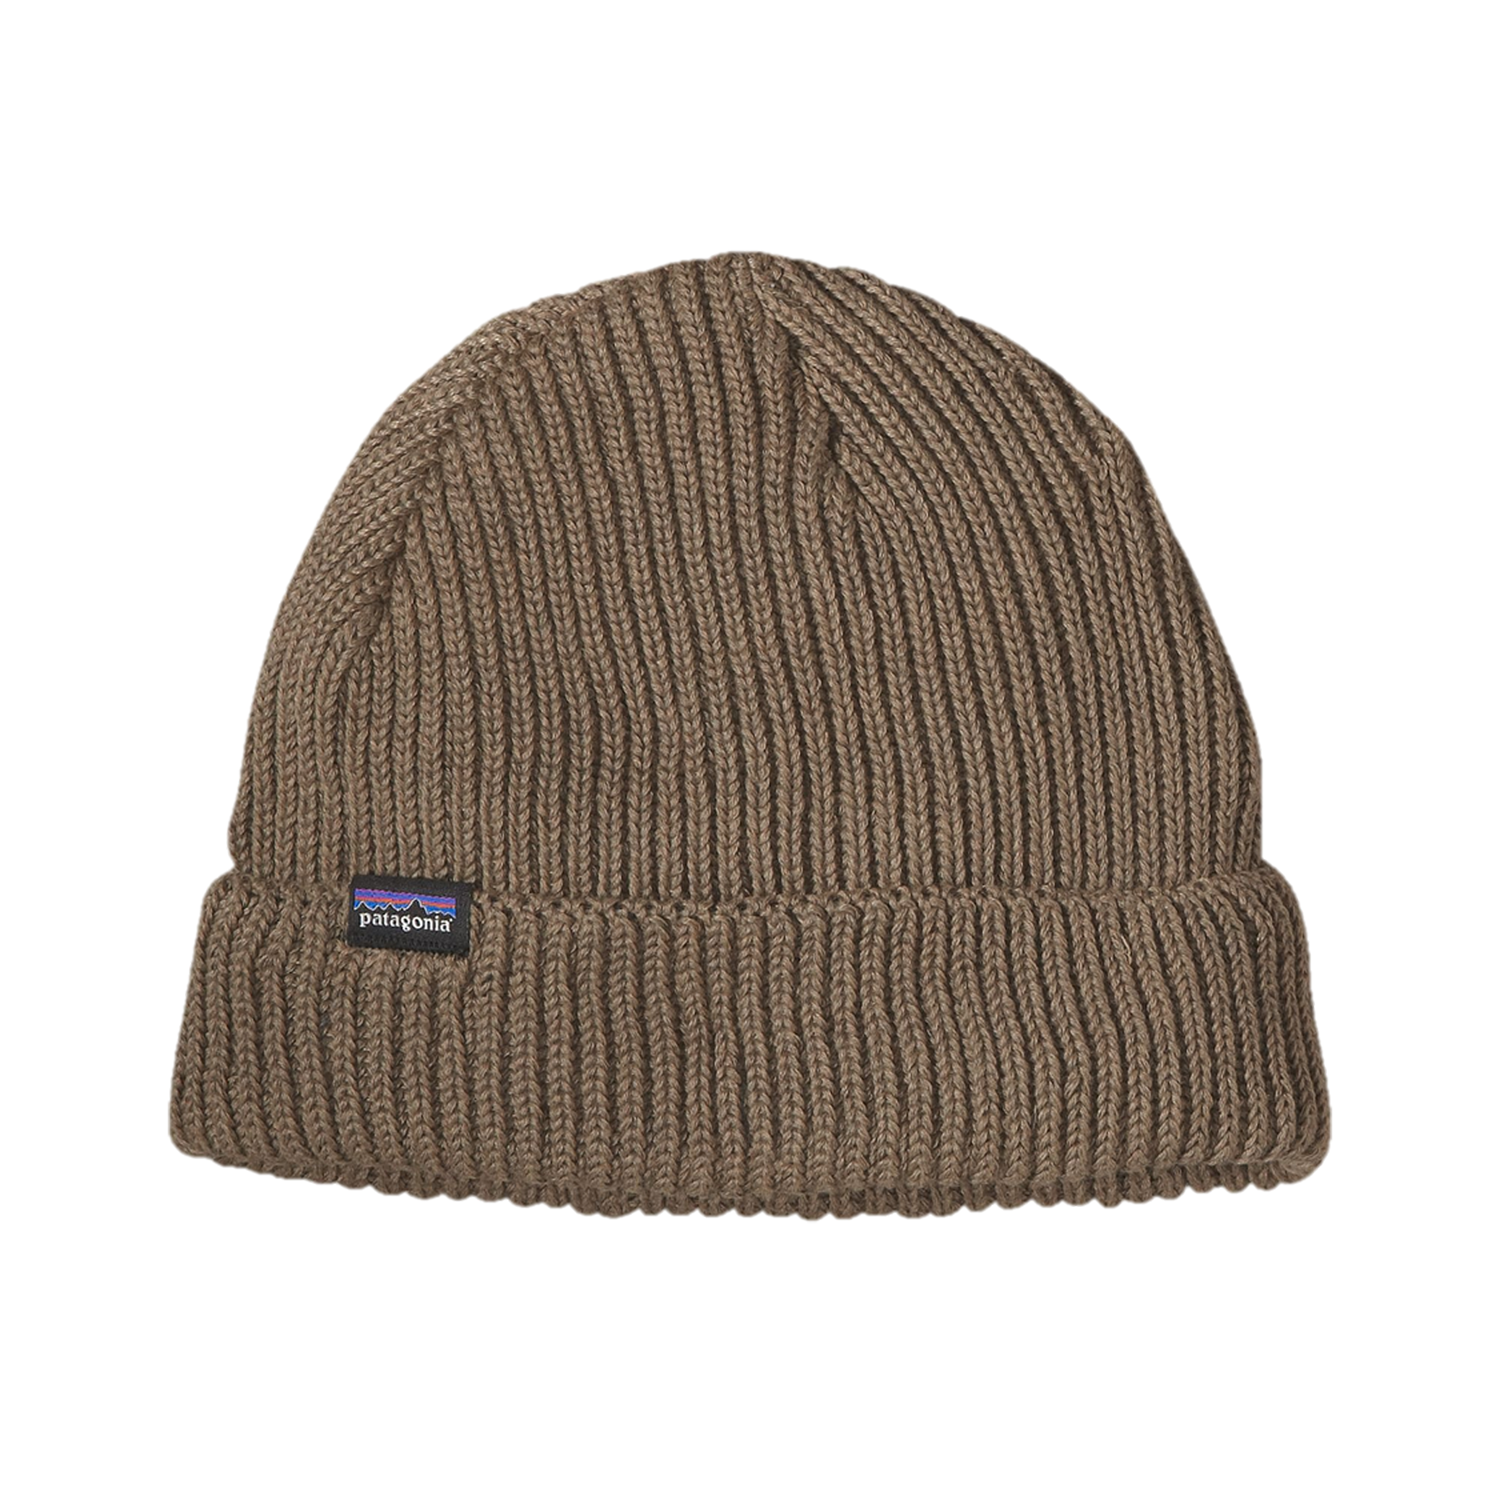 Ash Tan Colour of the Patagonia Fisherman's Rolled Beanie